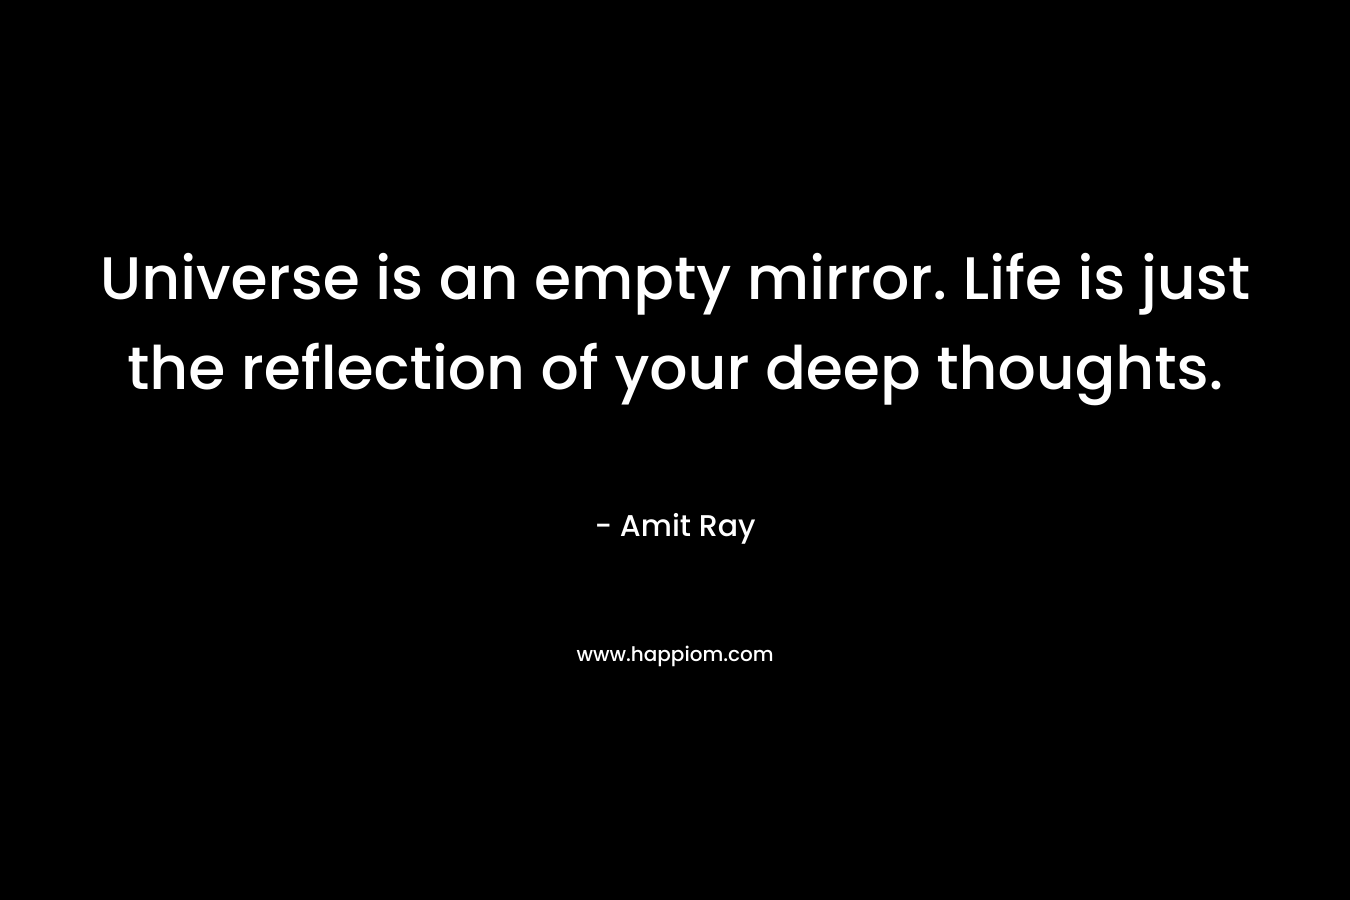 Universe is an empty mirror. Life is just the reflection of your deep thoughts.